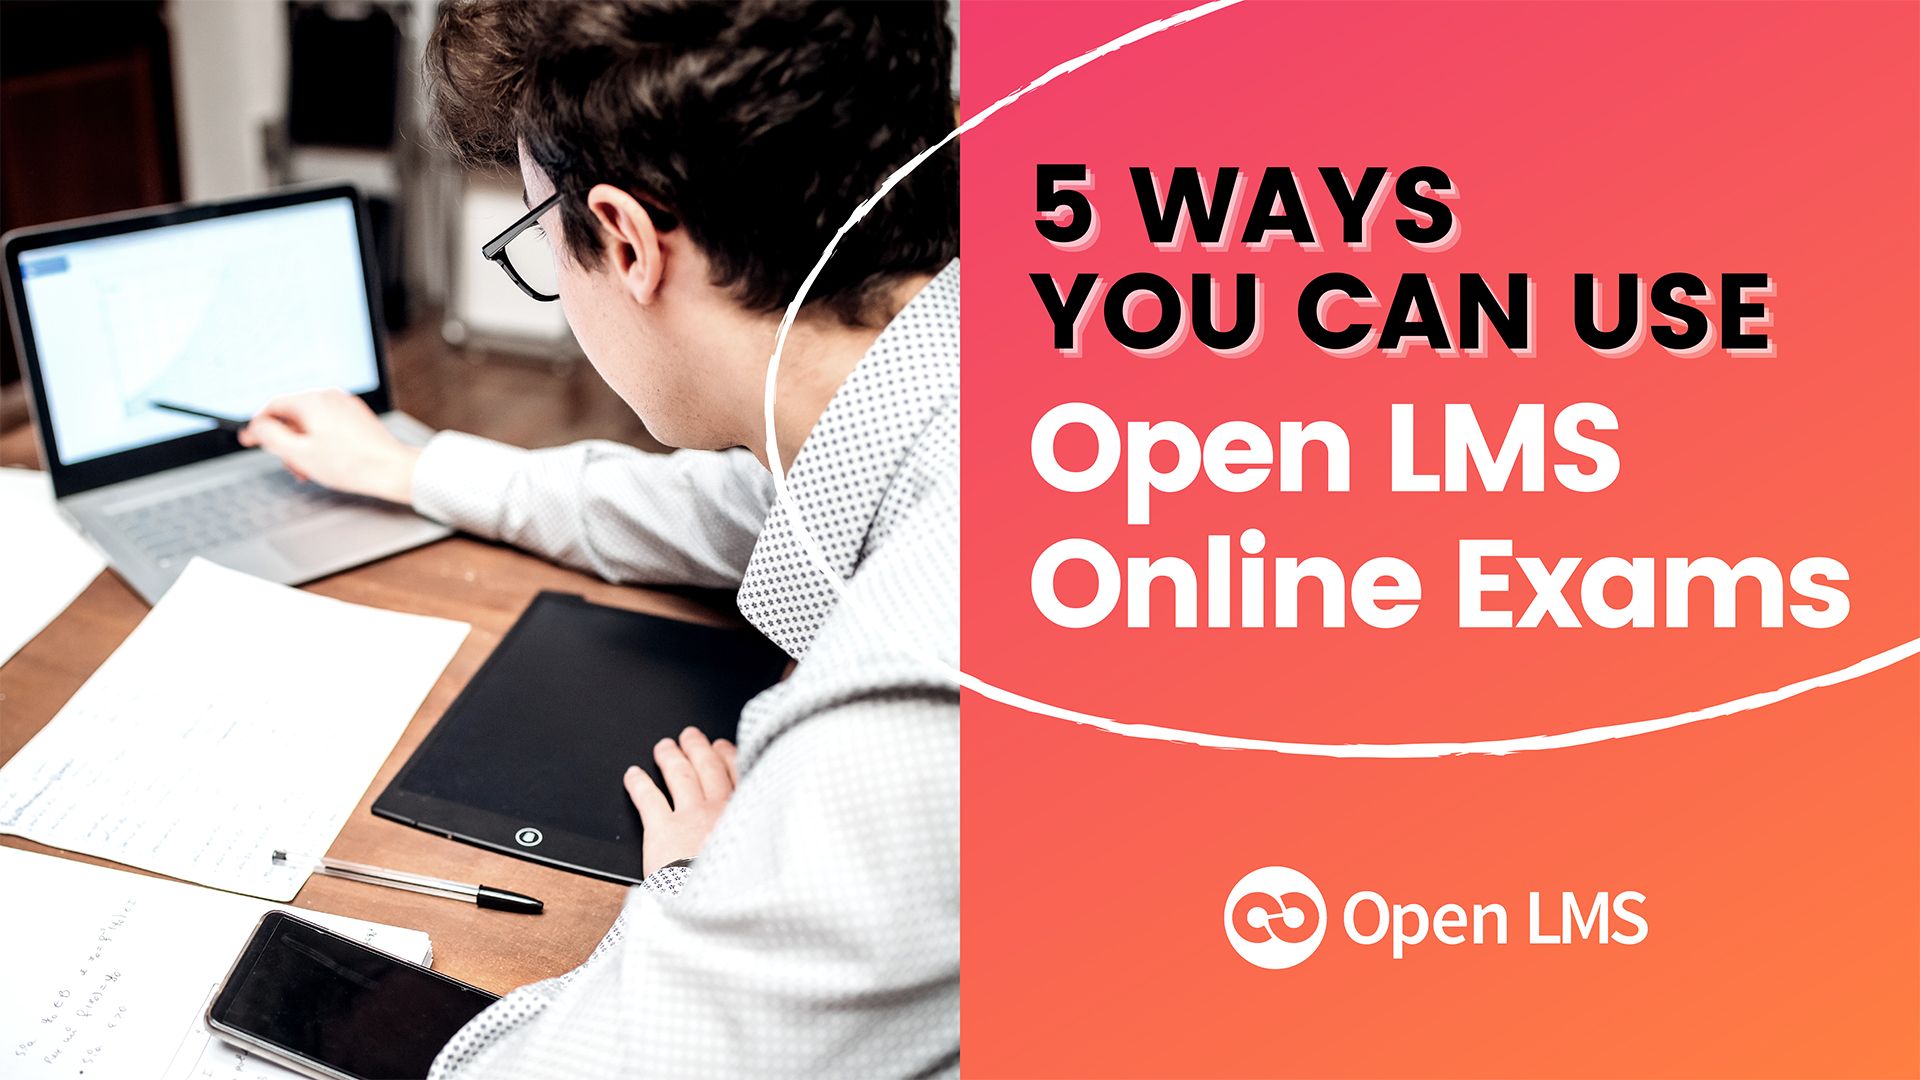 5 Ways You Can Use Open LMS Online Exams to Your Institution’s Advantage